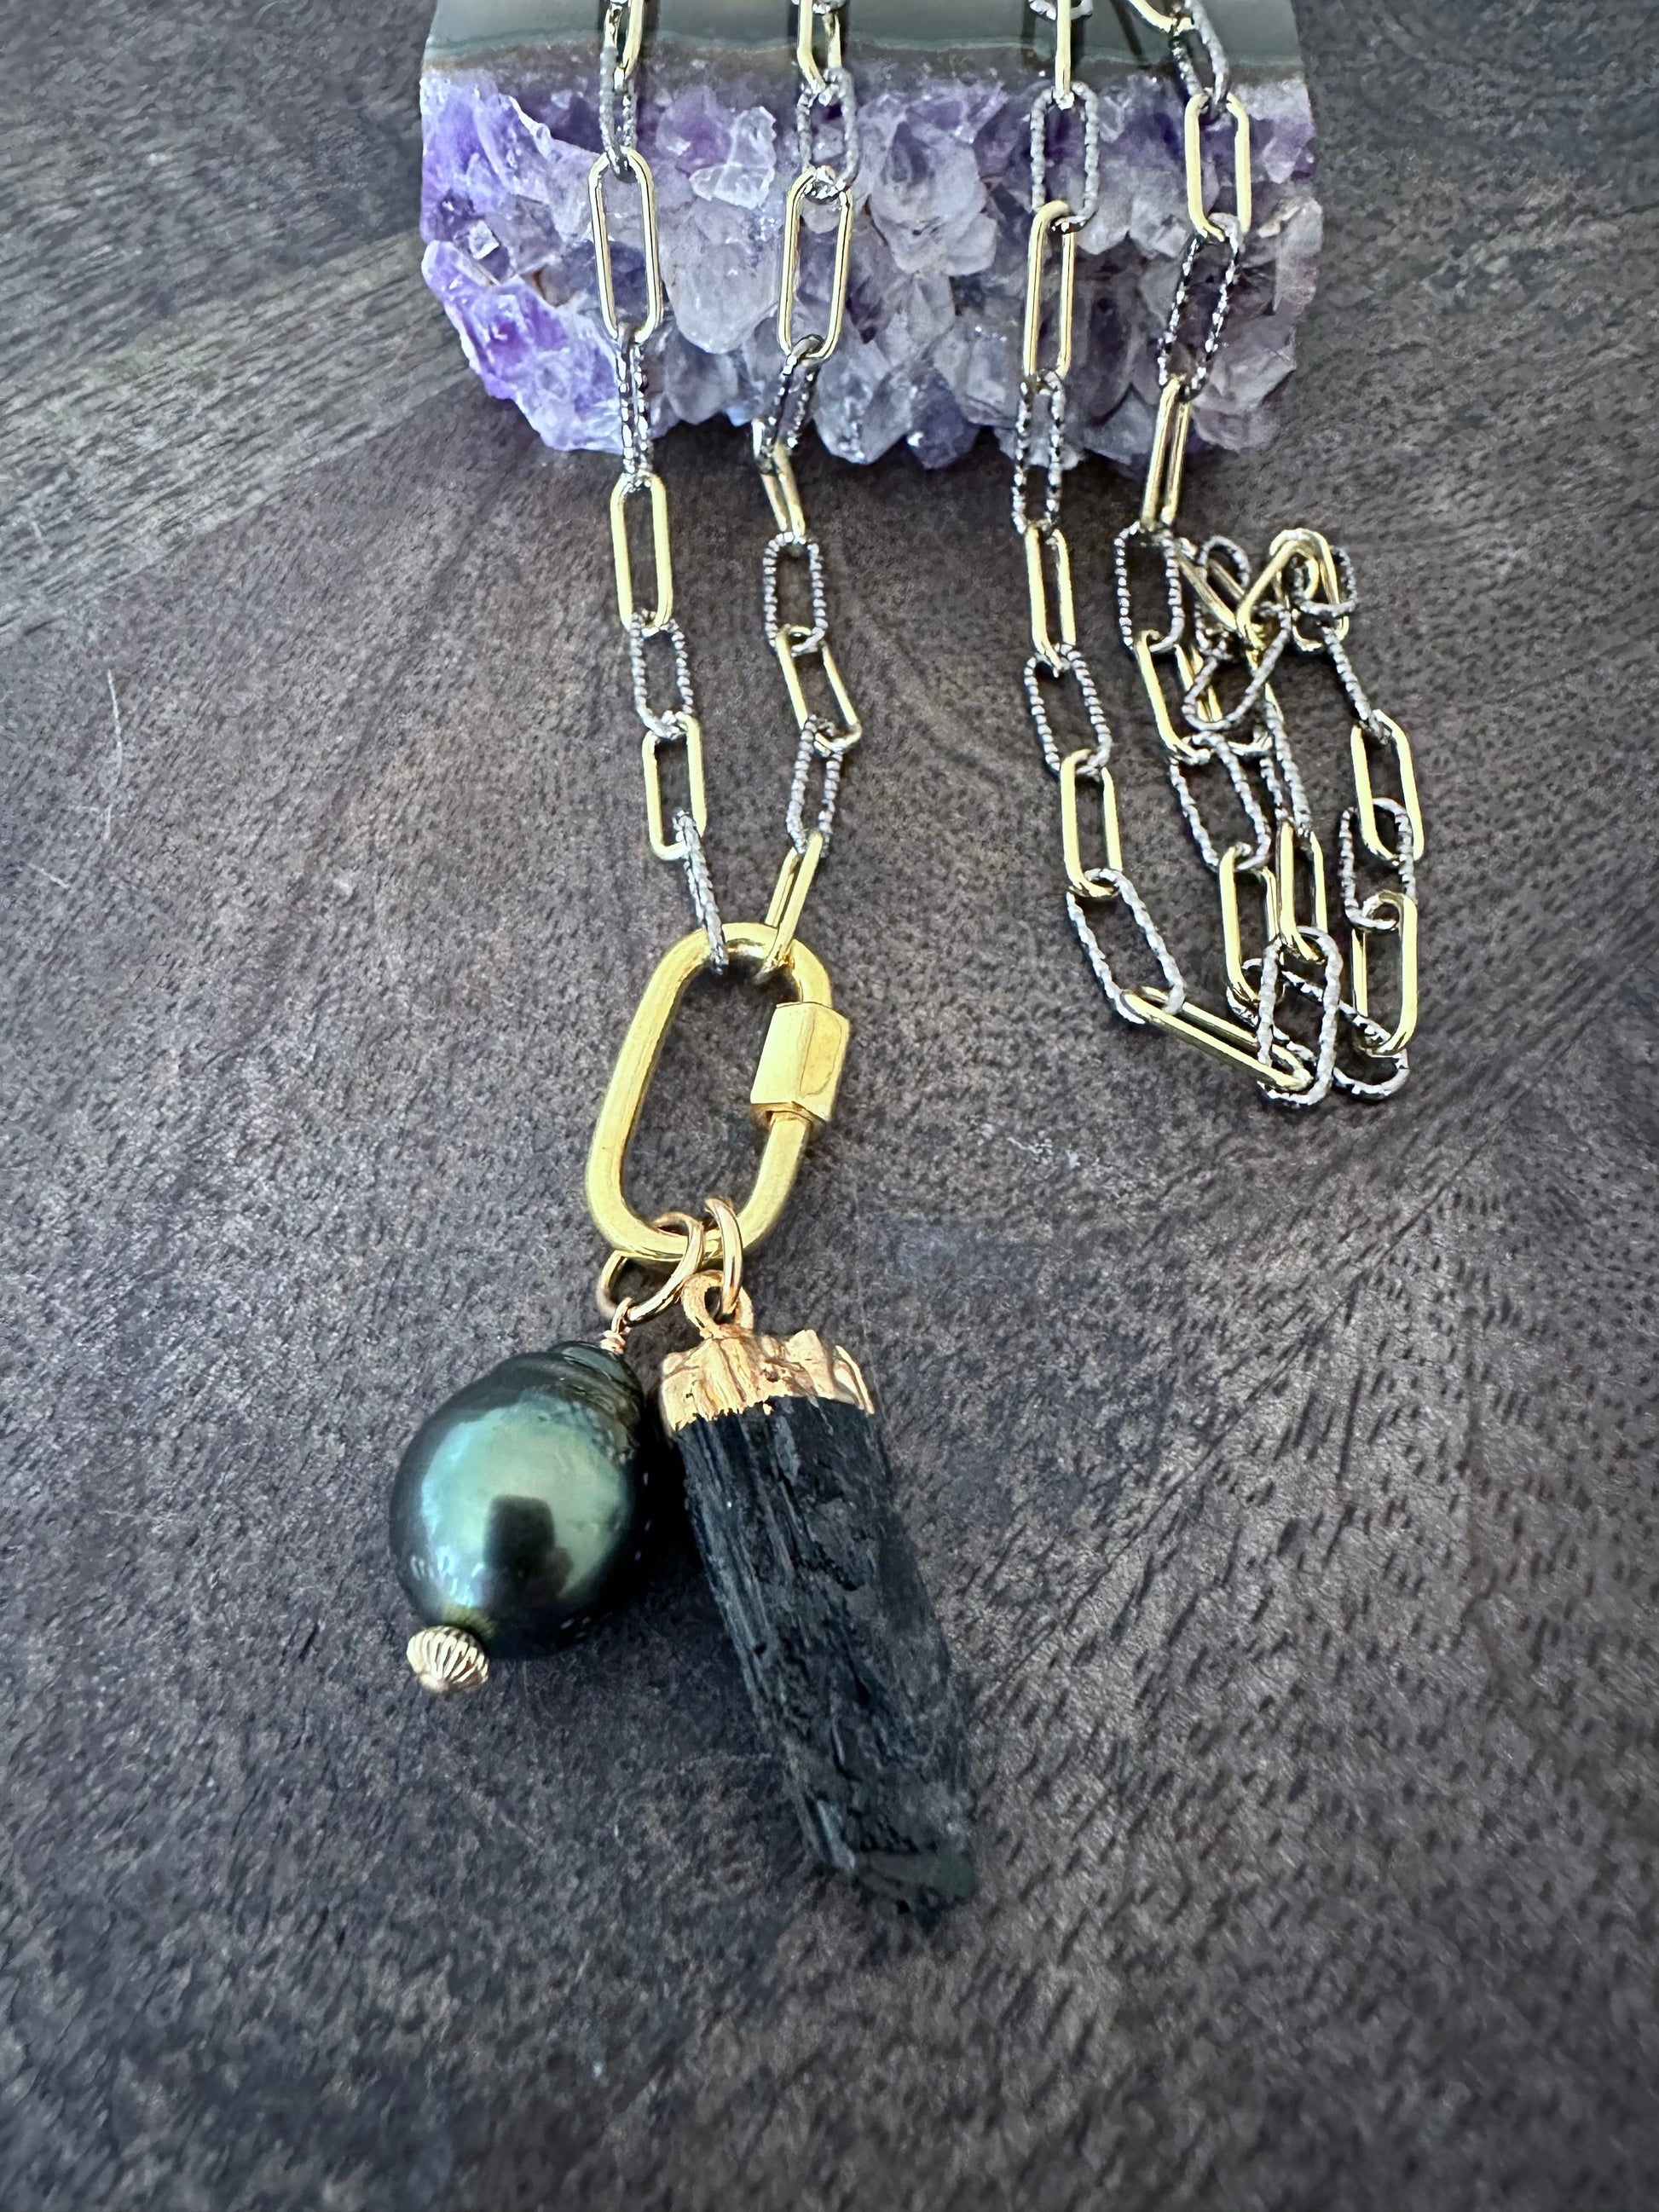 a long necklace wth mixed metal chain with a gold carabeaner and a large black pearl and a raw black tourmaline pendant on a purple amethyst chunk on a wooden background